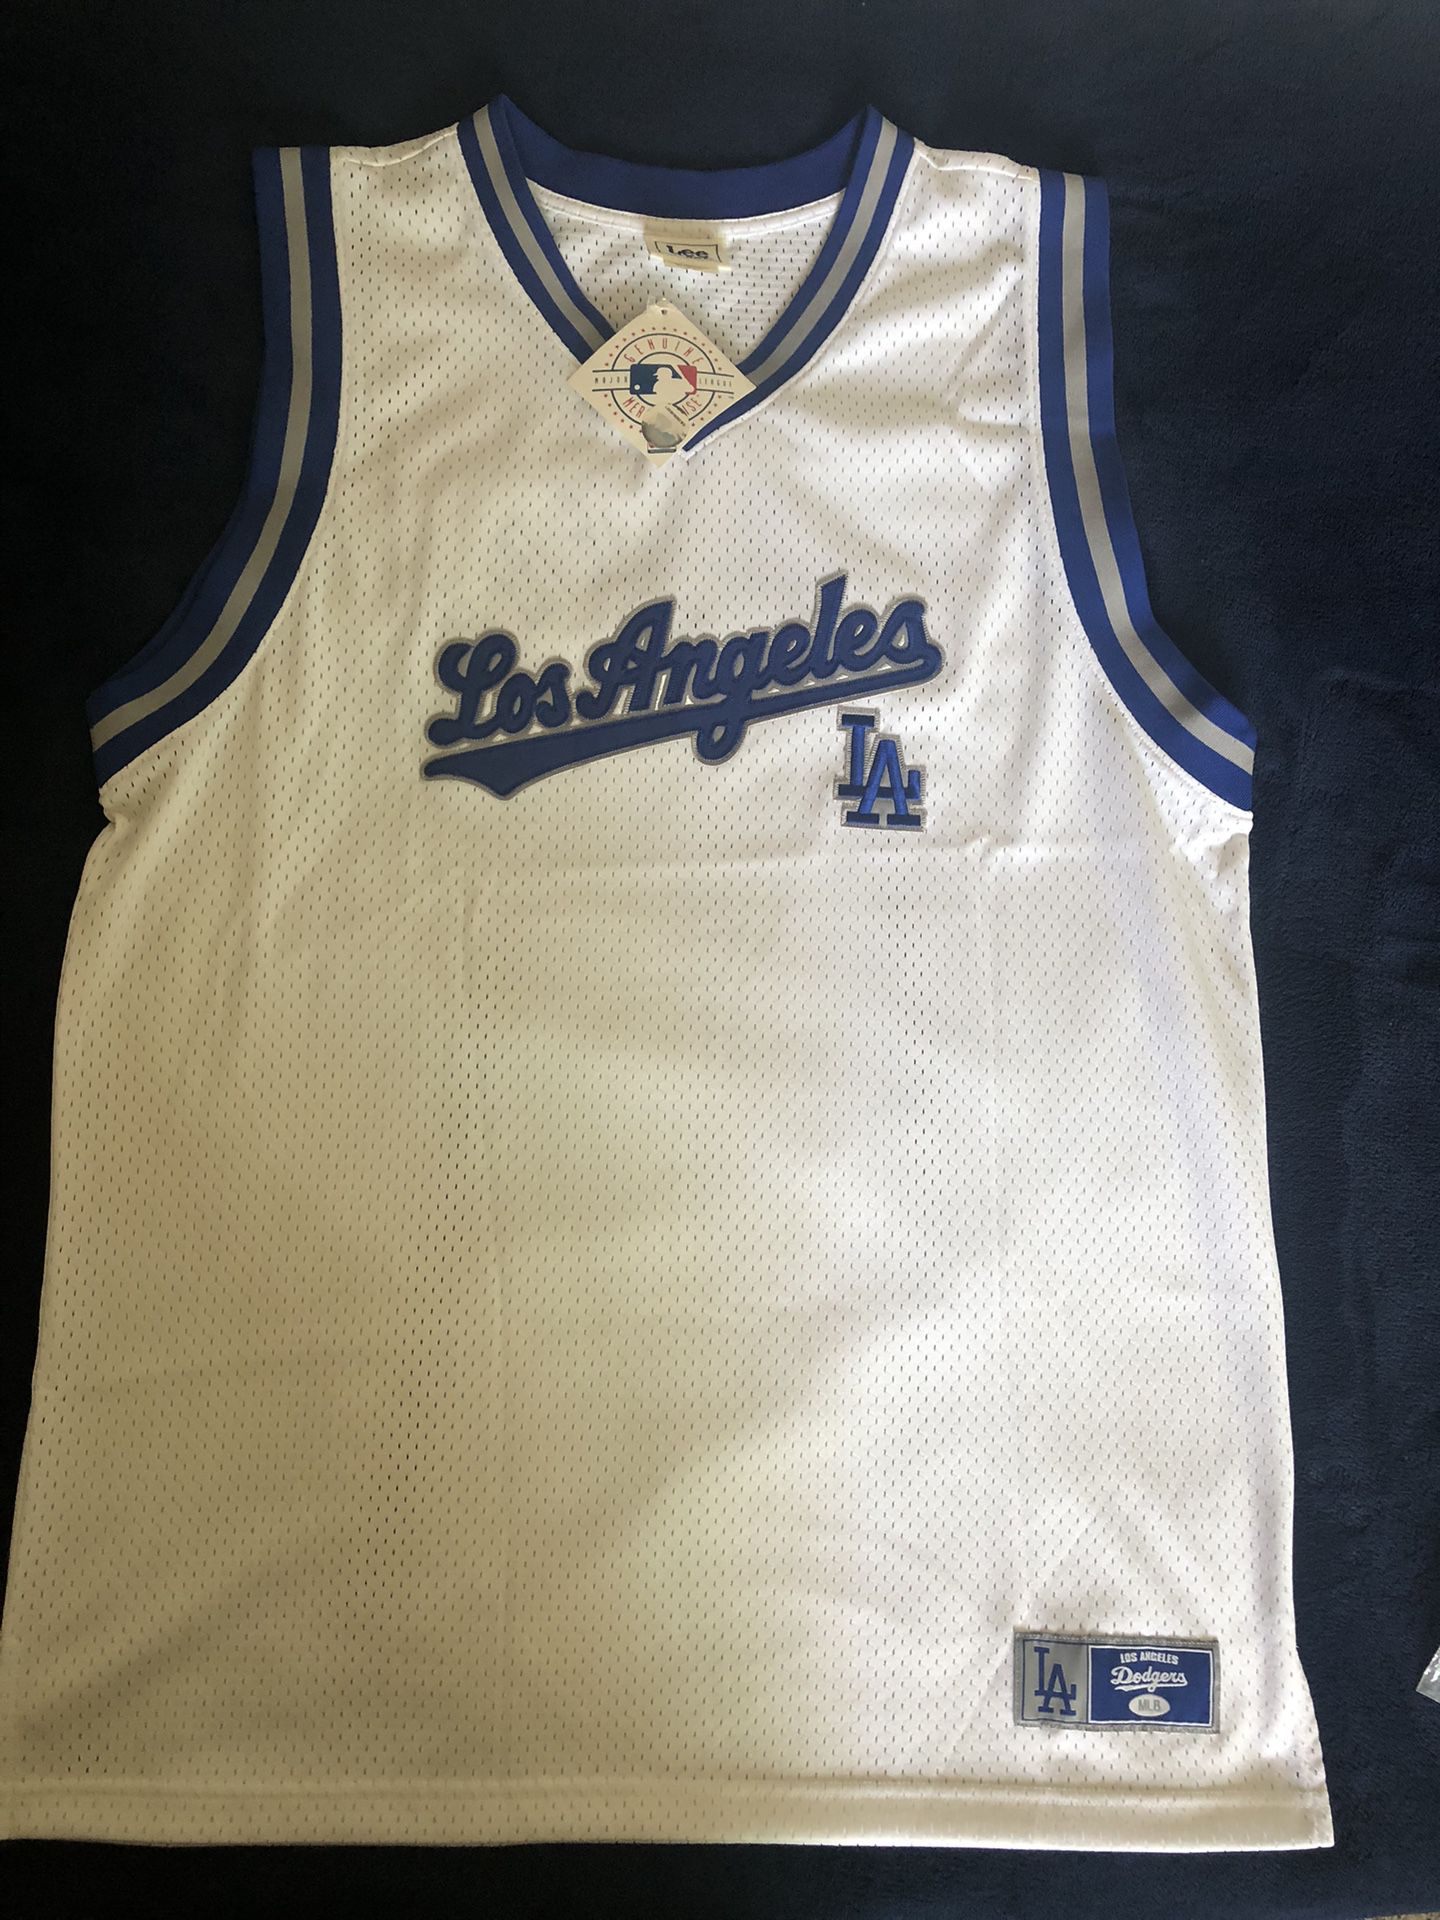 Rare Los Angeles Dodgers Baseball Jersey for Sale in Chula Vista